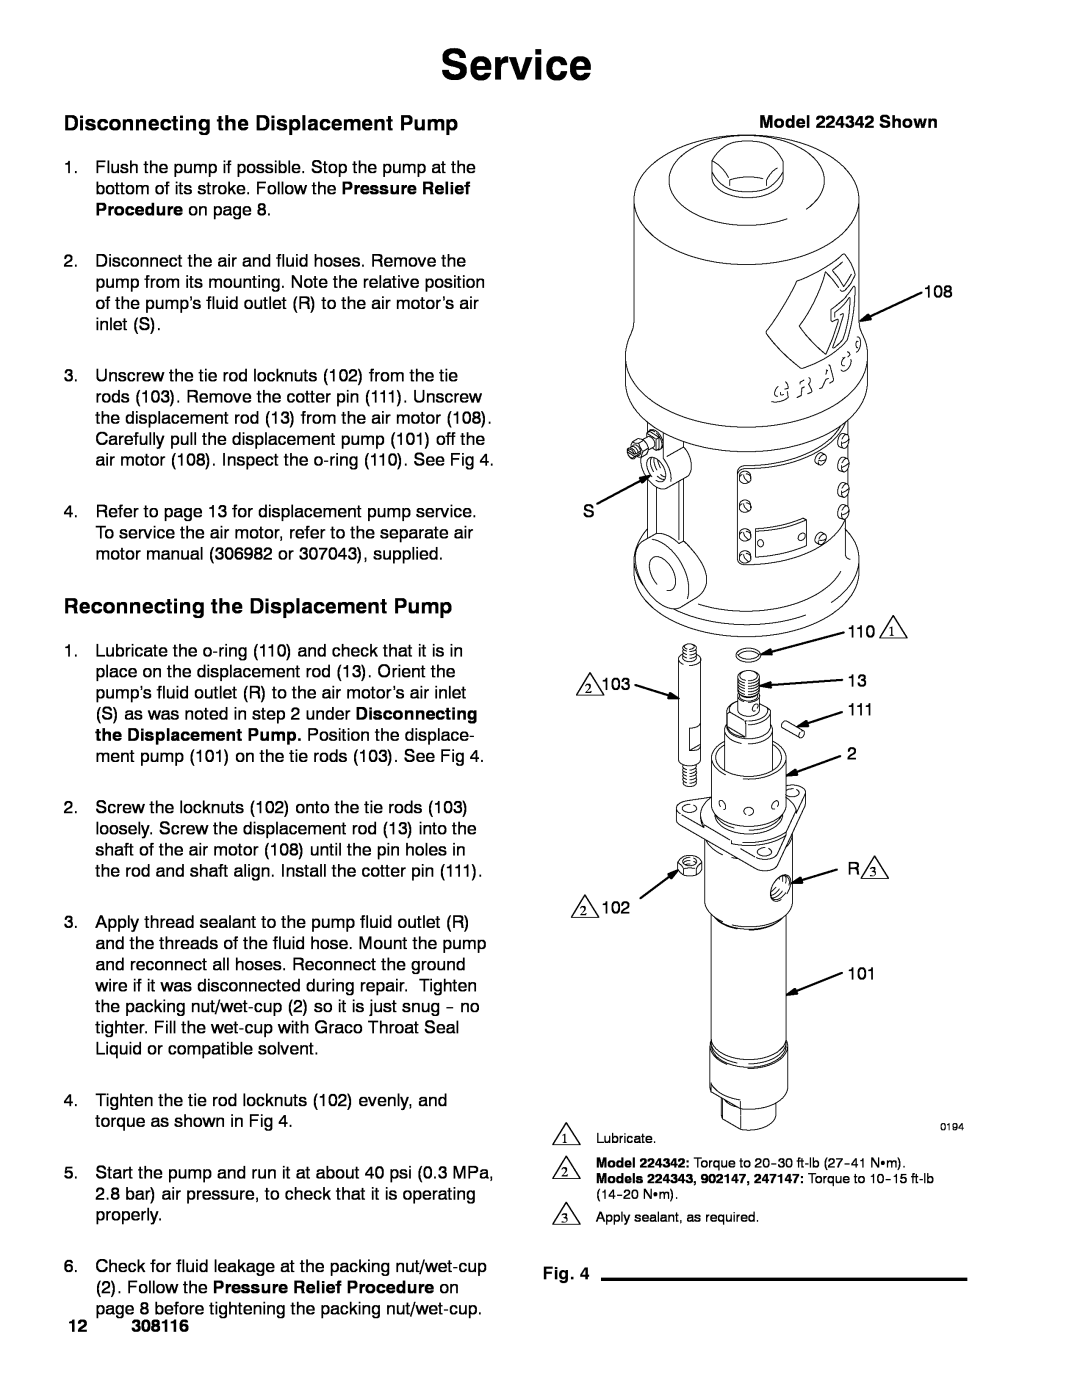 Graco 308116T Service, Disconnecting the Displacement Pump, Reconnecting the Displacement Pump, Model 224342 Shown 